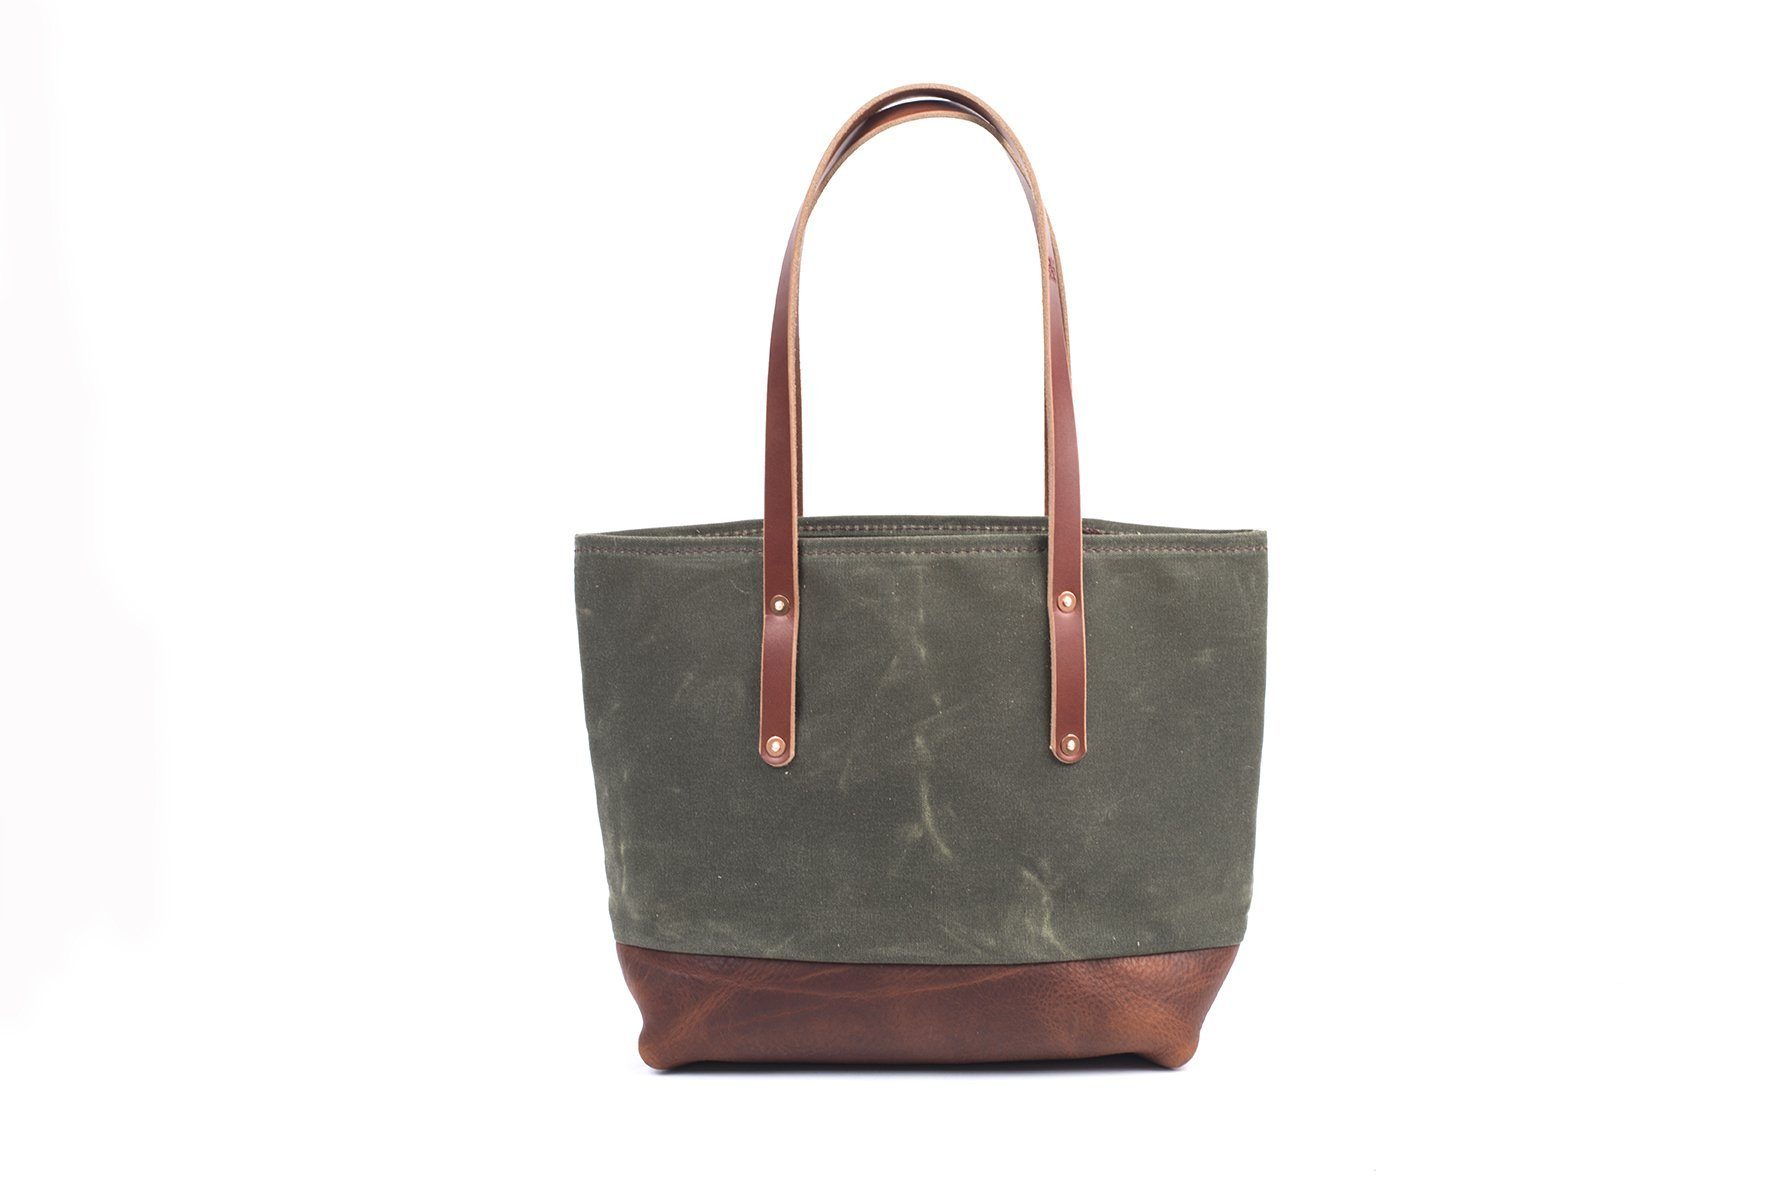 AVERY WAXED CANVAS TOTE BAG - MEDIUM - Go Forth Goods